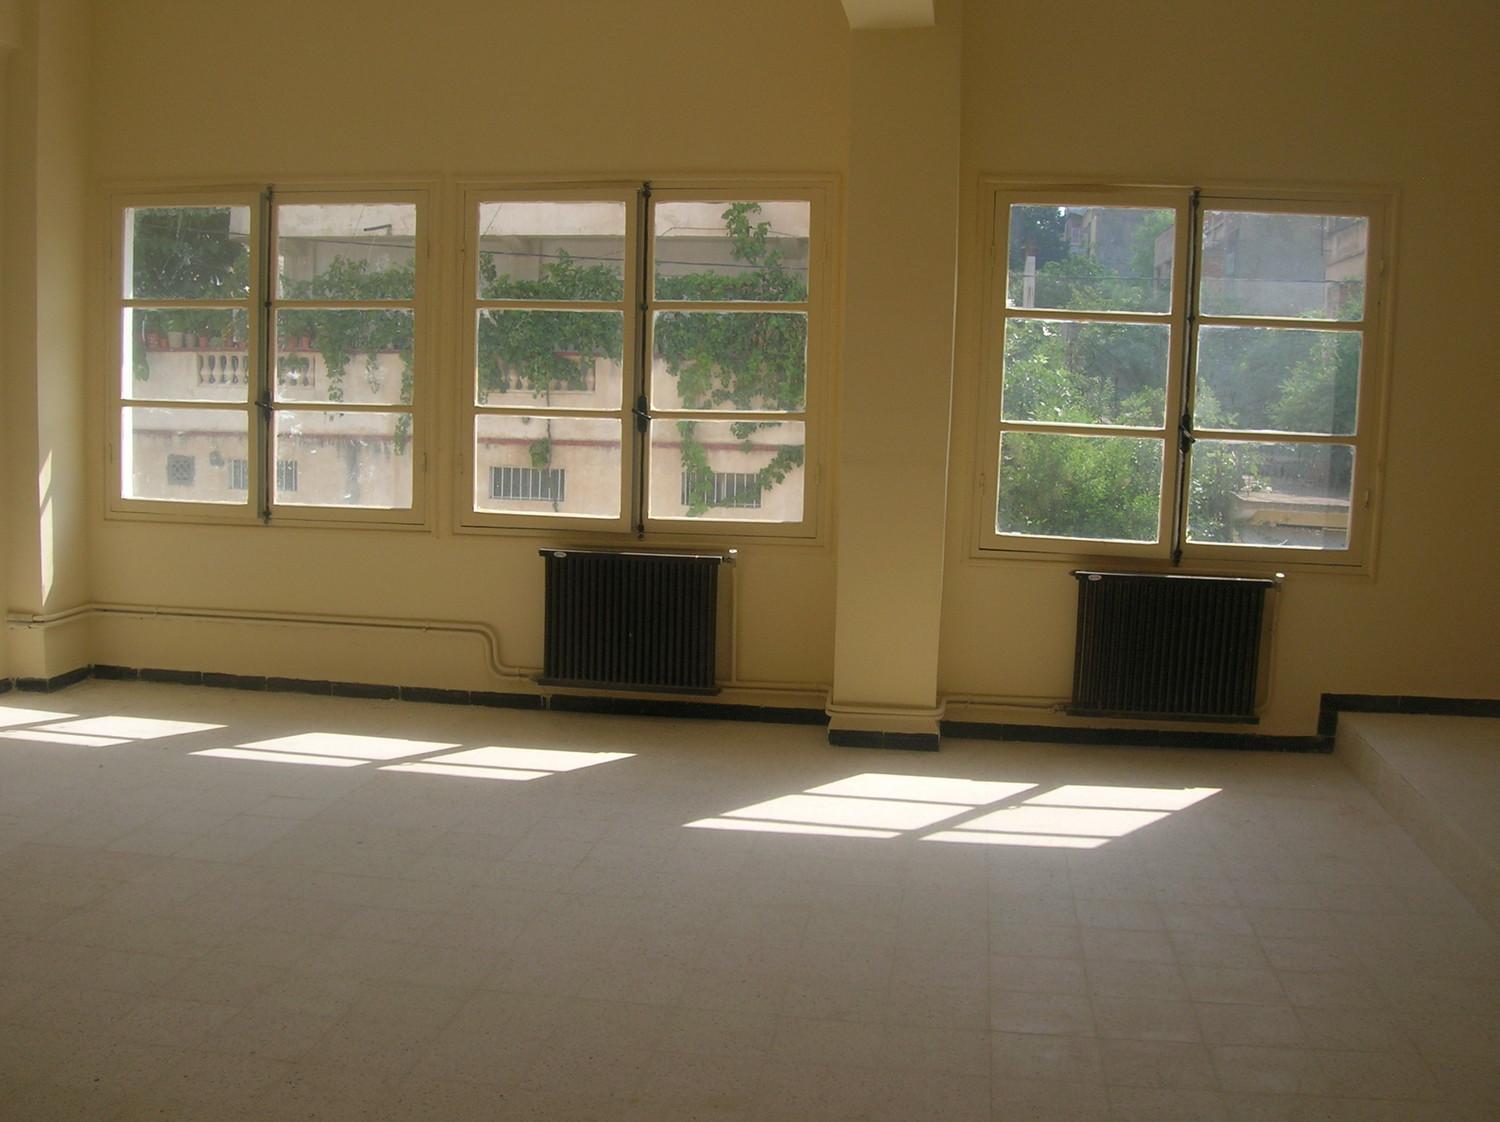 View of classroom